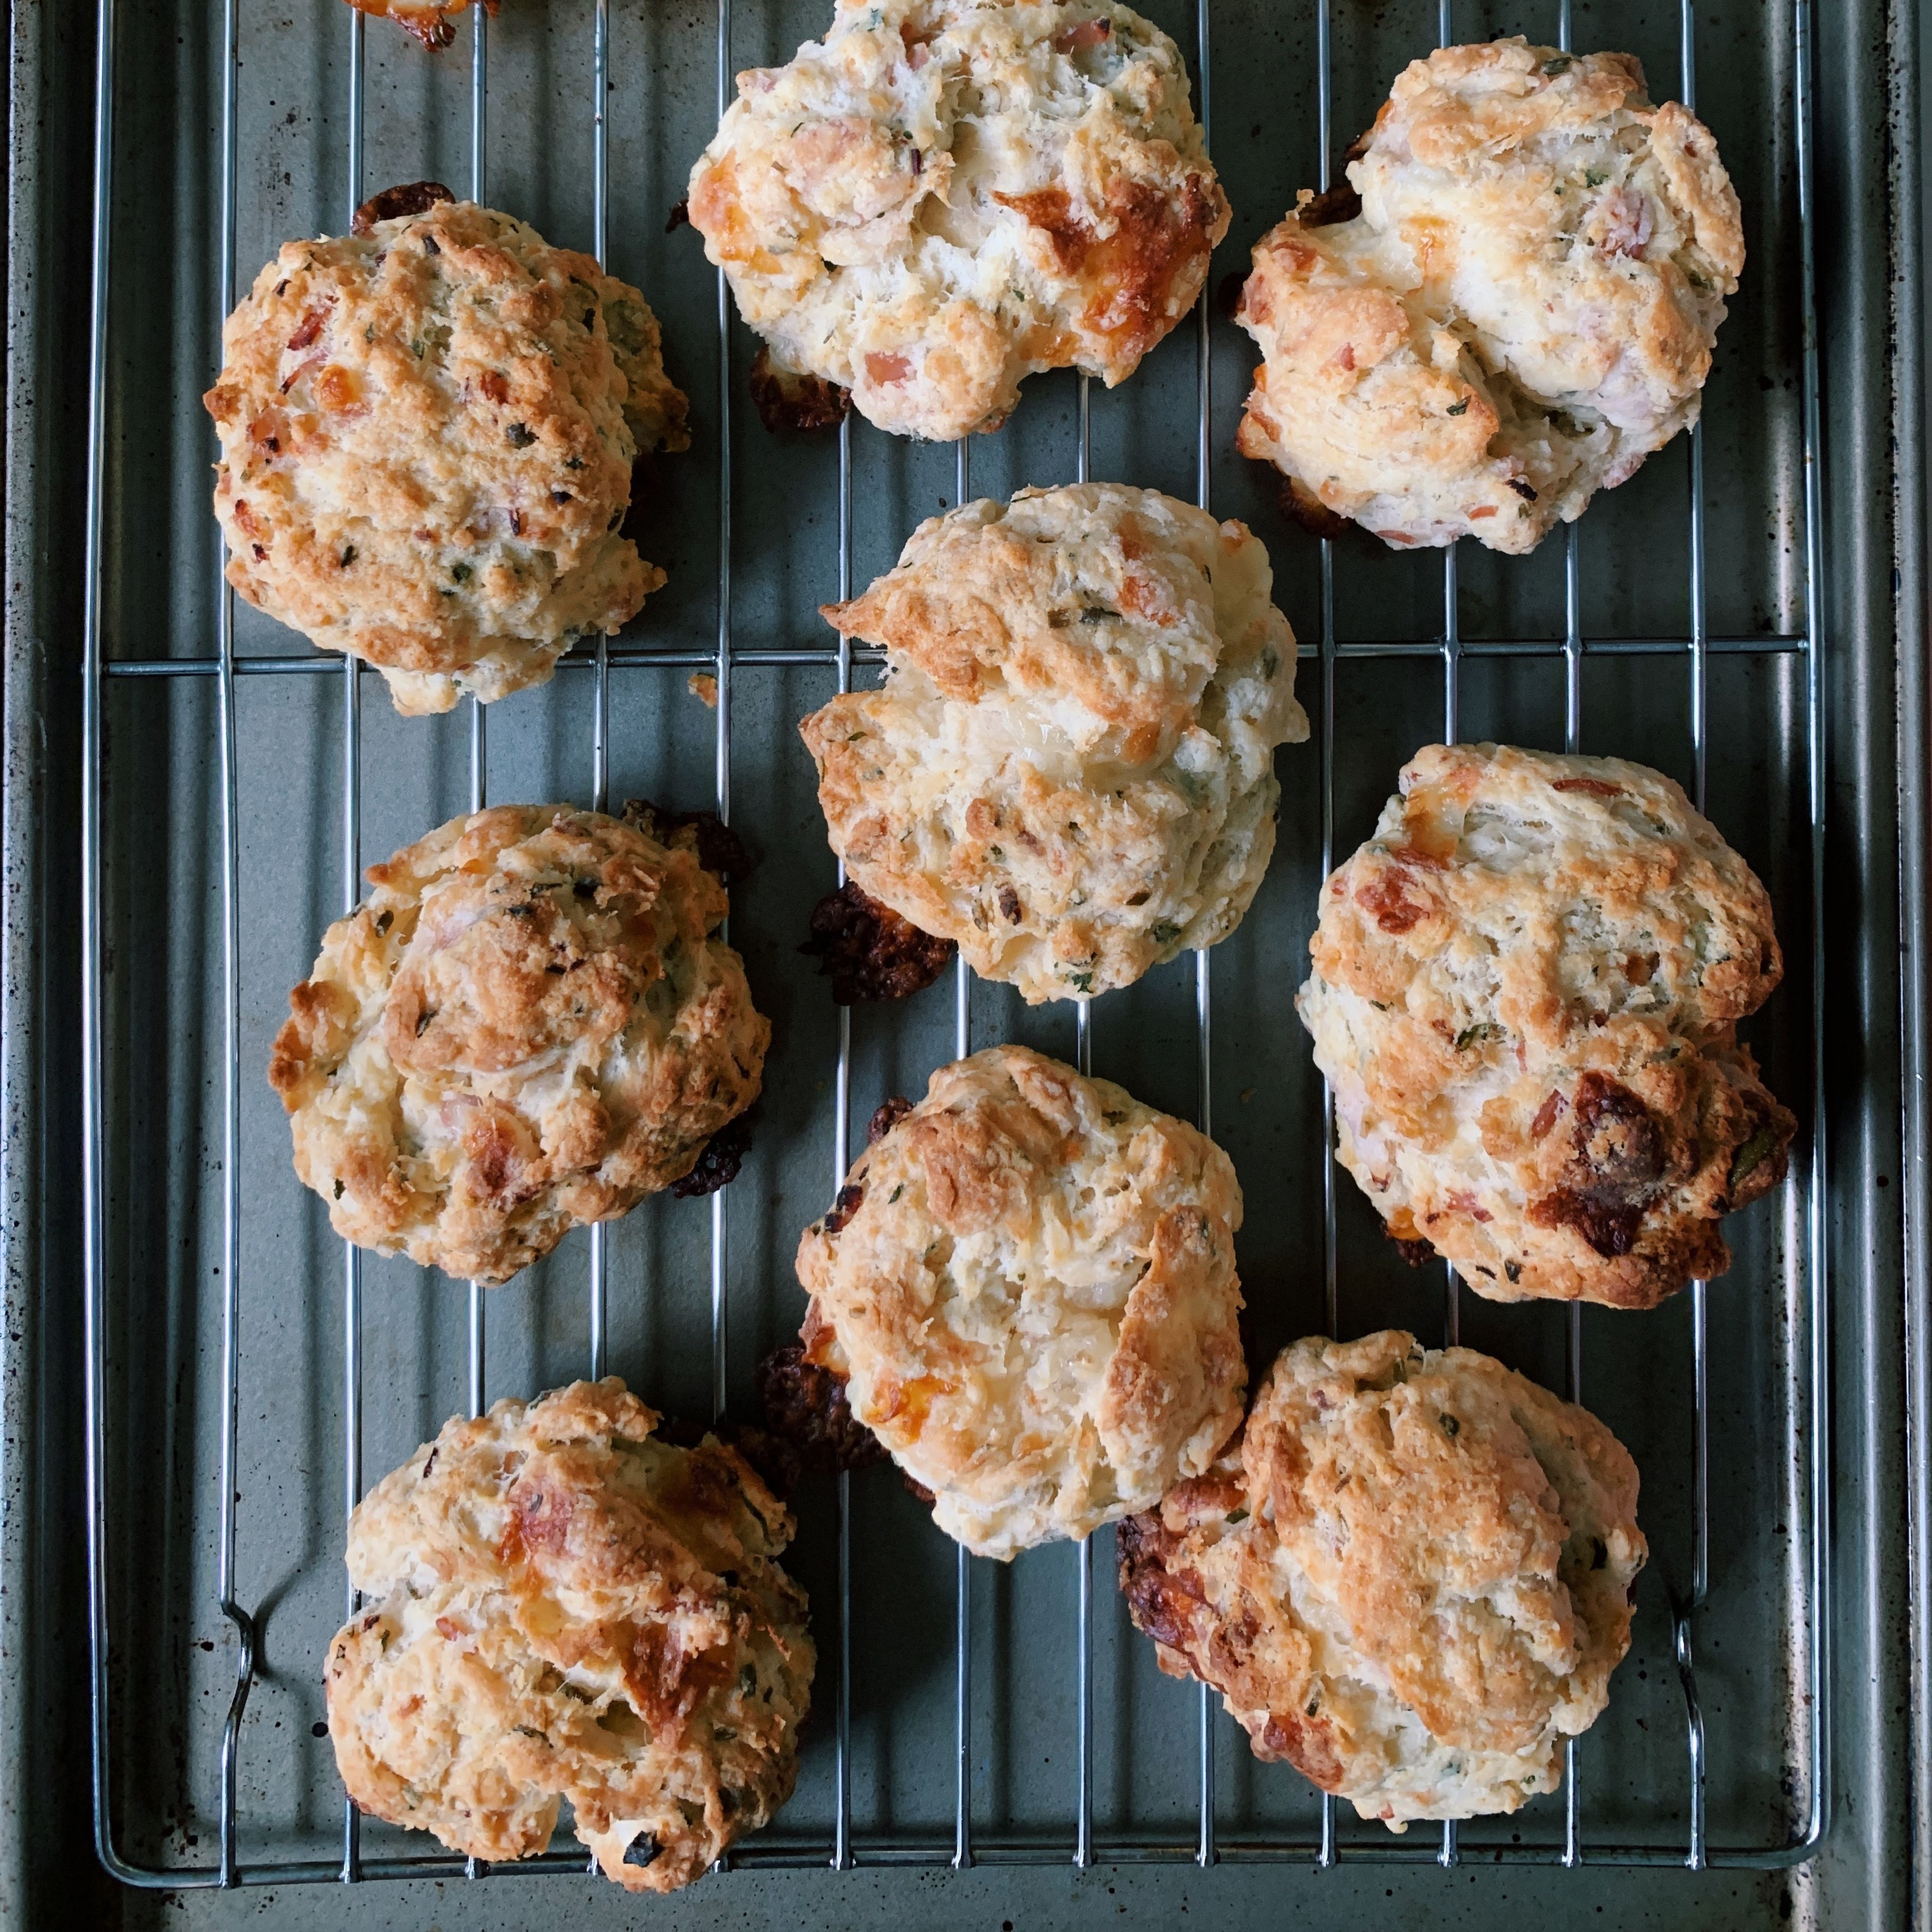 Savoury herby and cheesey scone (British style)